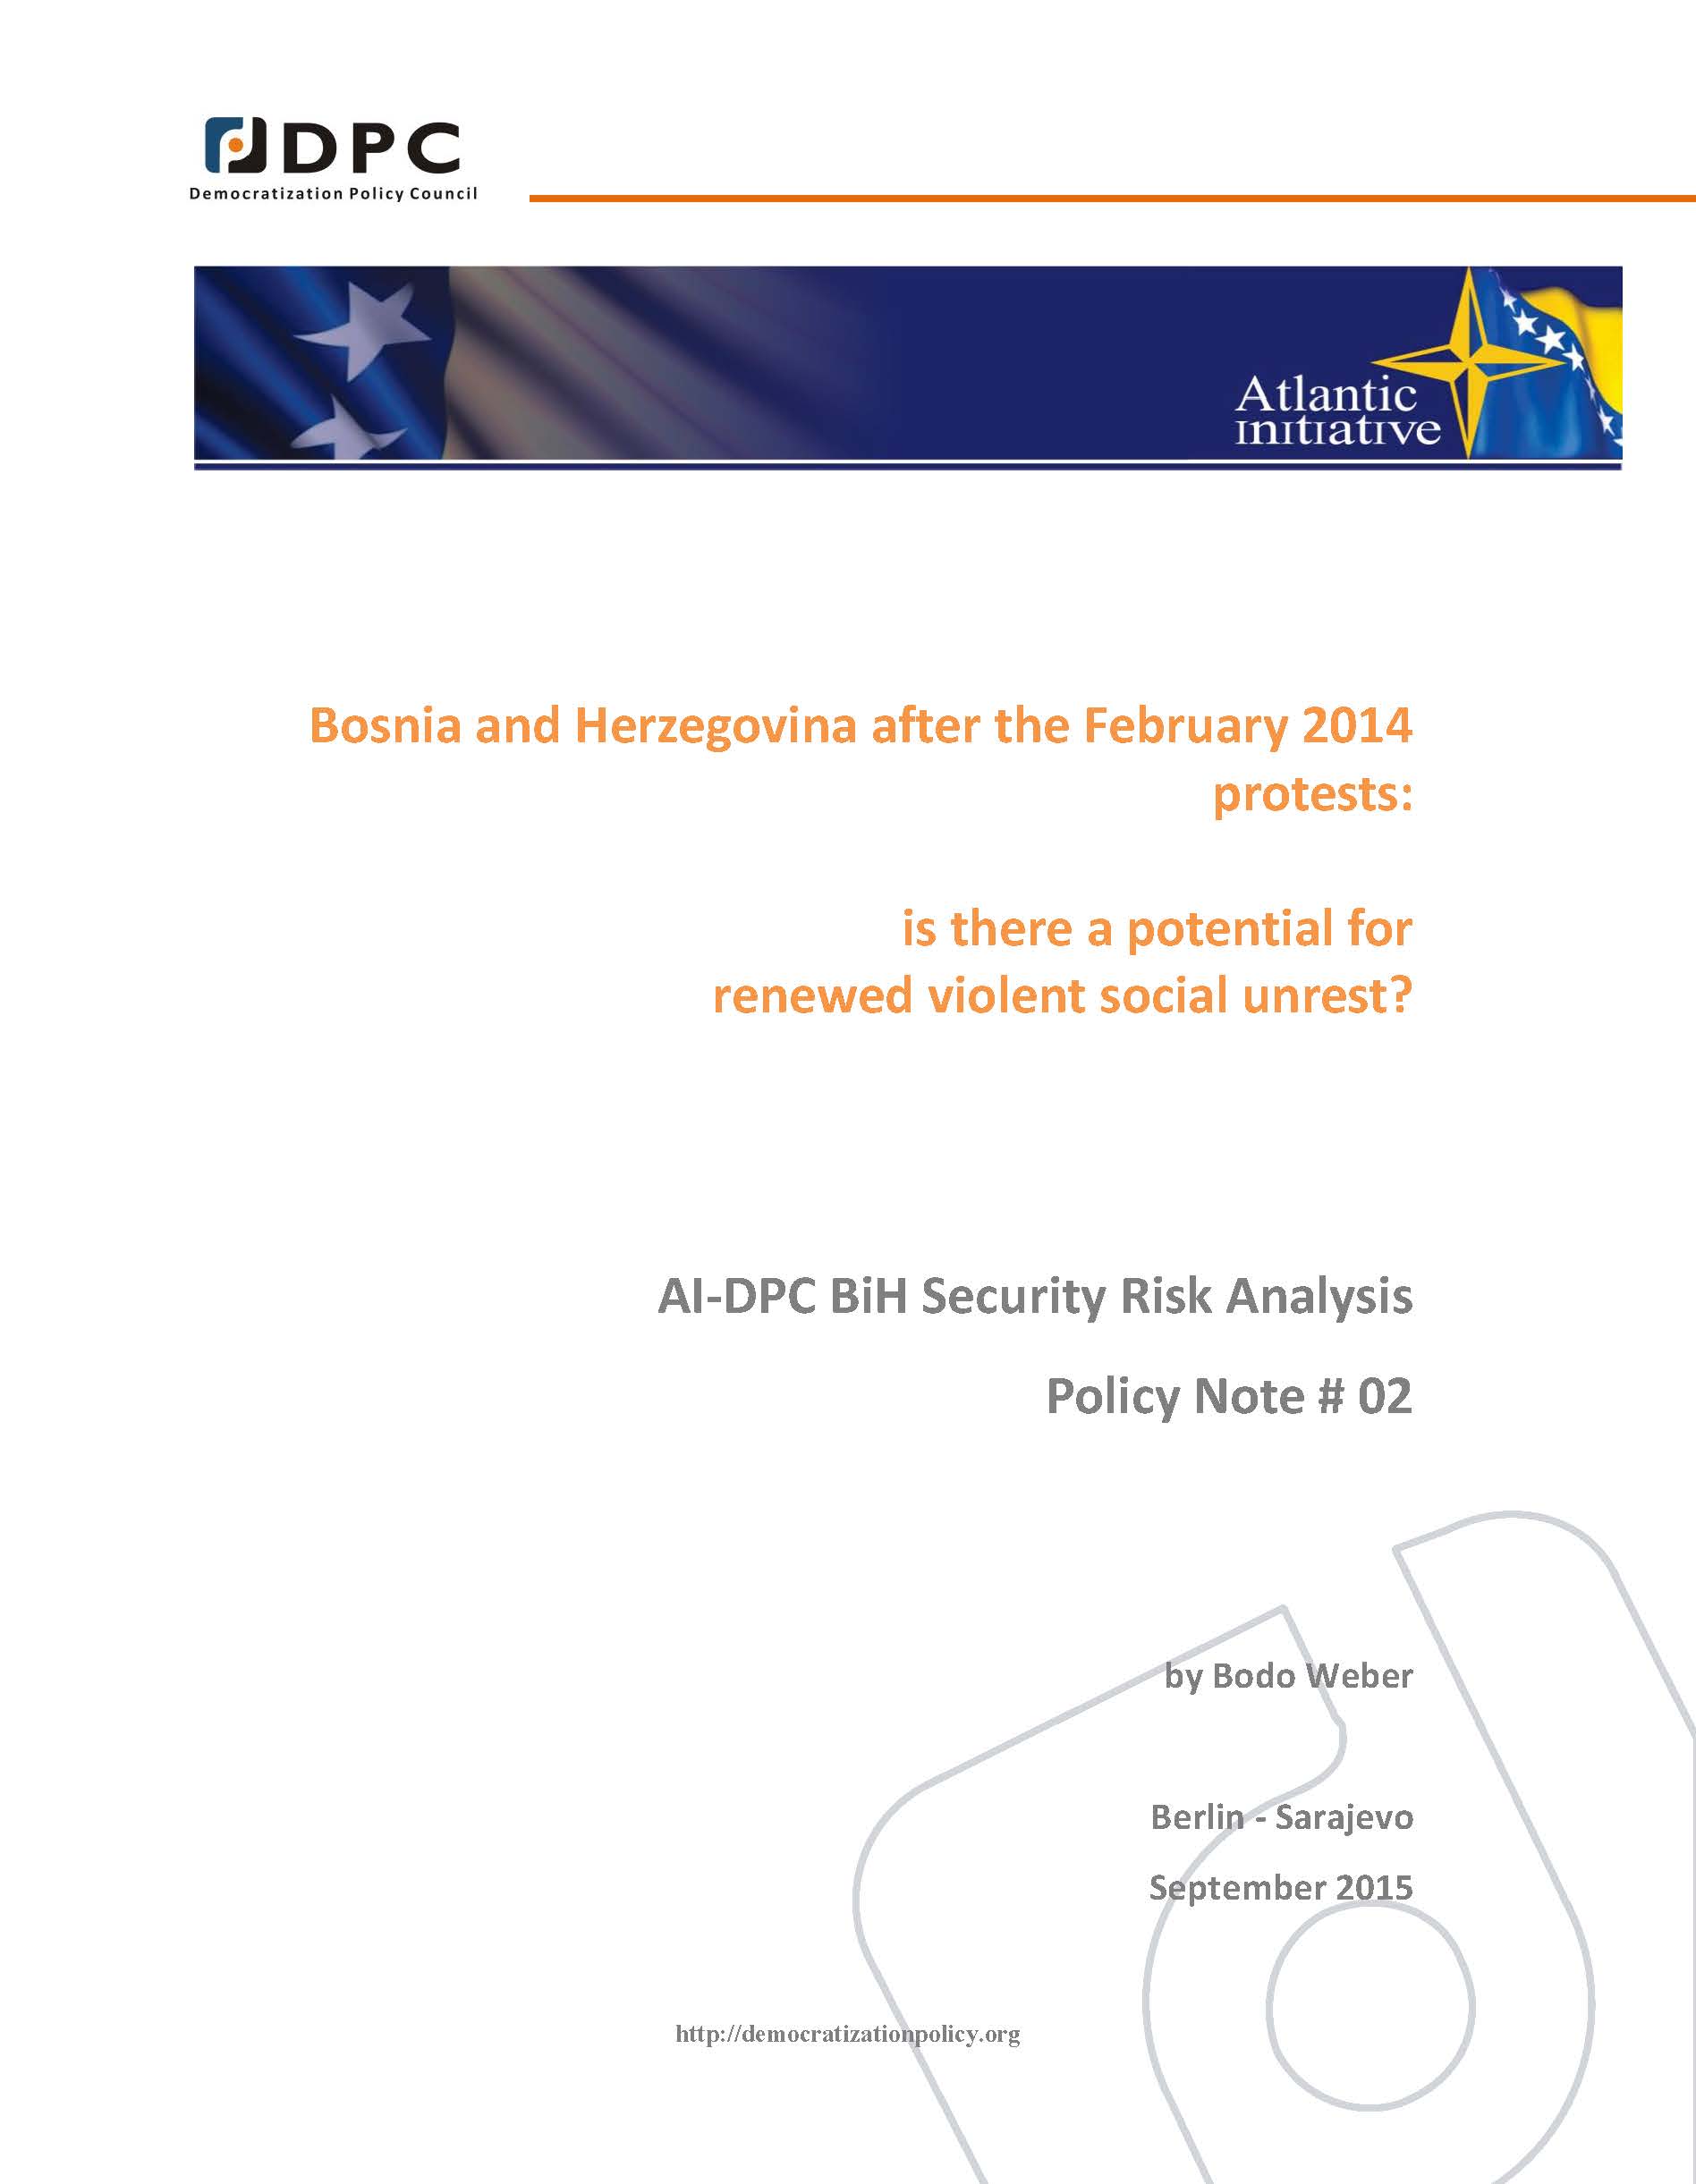 AI-DPC BiH SECURITY ANALYSIS POLICY NOTE 02: Bosnia and Herzegovina after the February 2014 protests: is there a potential for renewed violent social unrest?